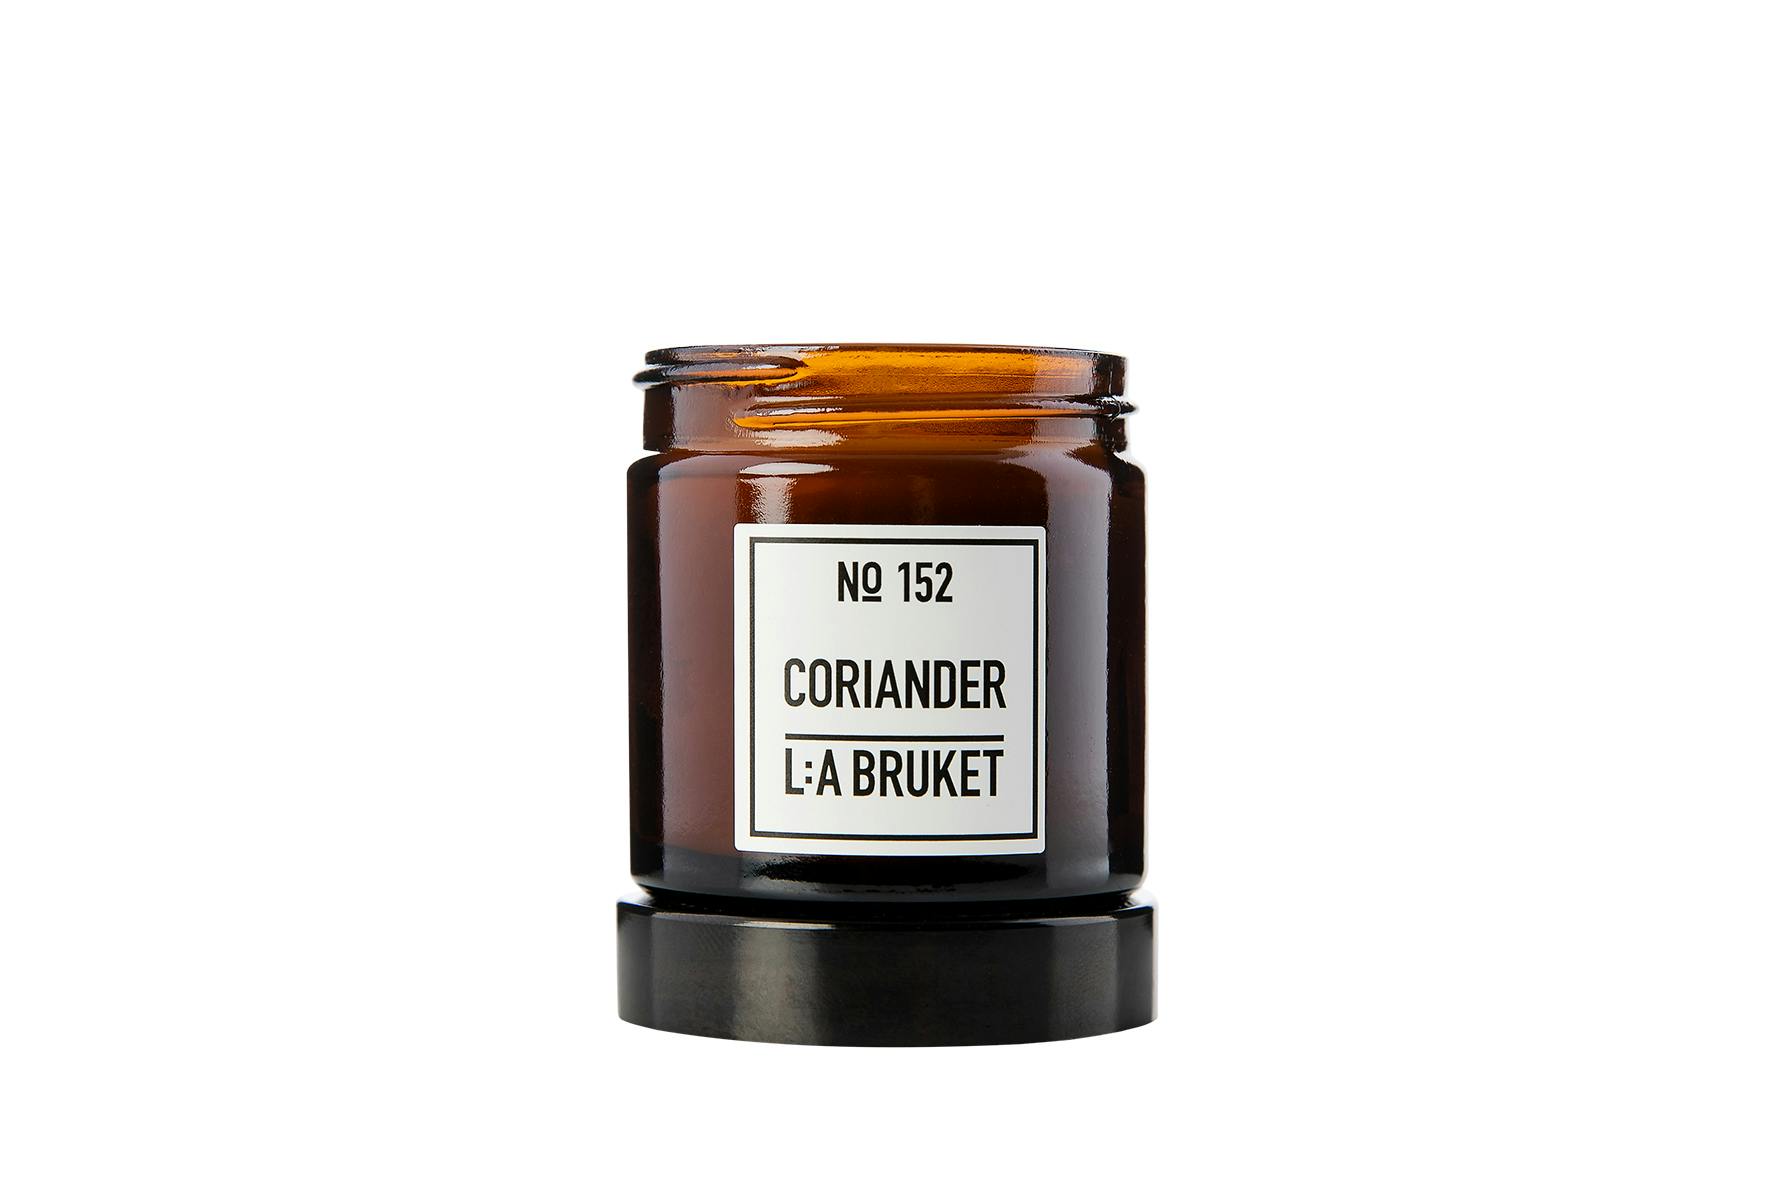 L:A Bruket candle, Scandi style. vegan candle, coriander, natural candles, organic, Nordic style